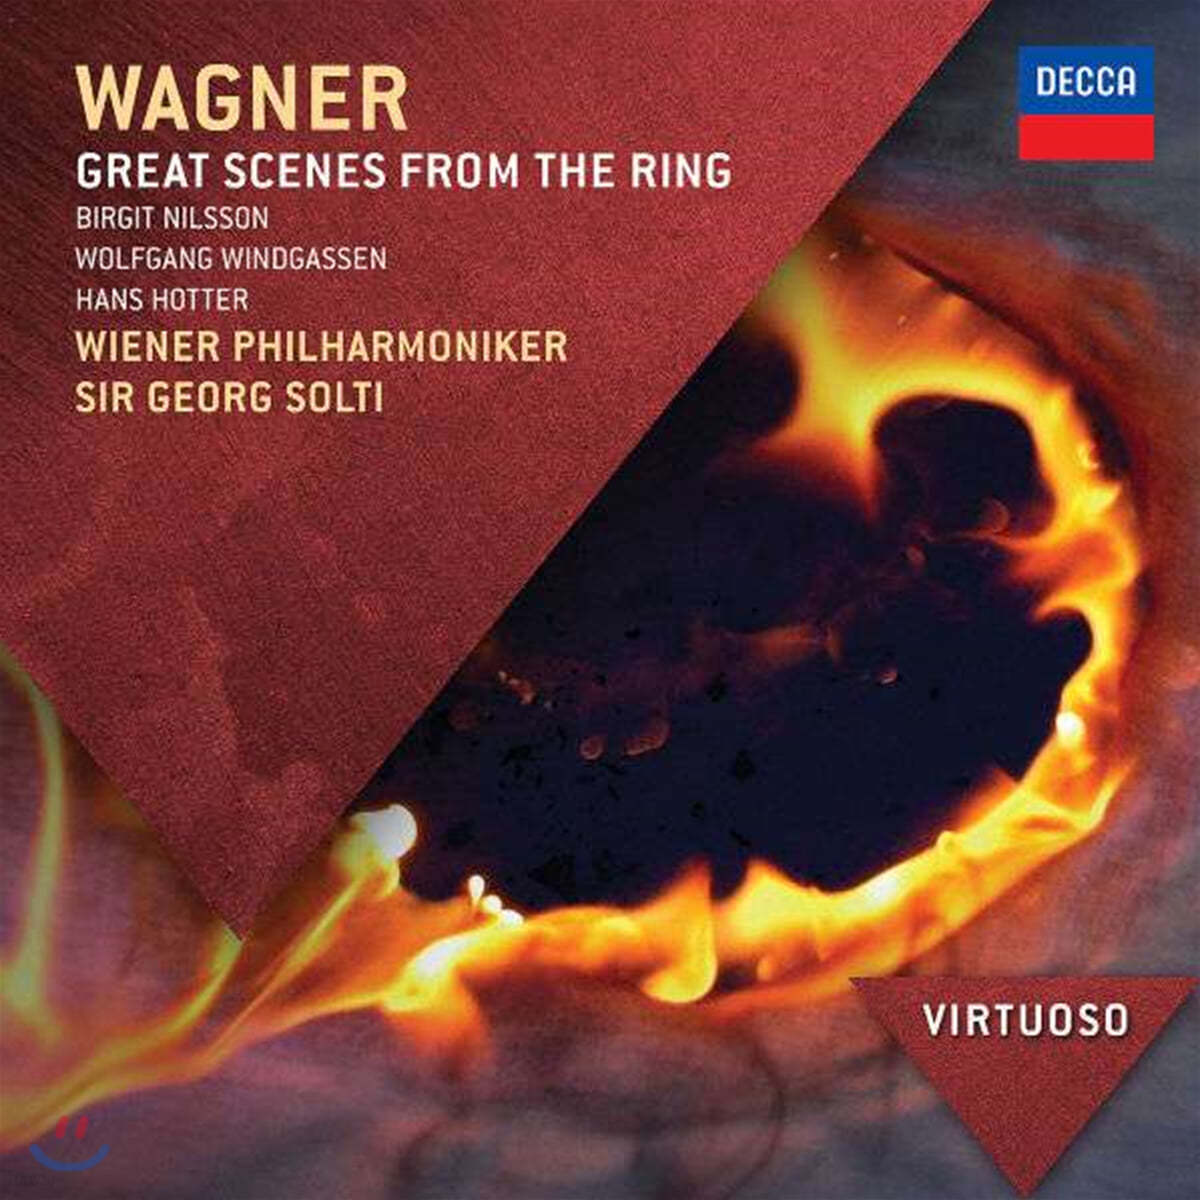 Georg Solti 바그너: 니벨룽겐의 반지 명장면 (Wagner: Great Scenes From The Ring)